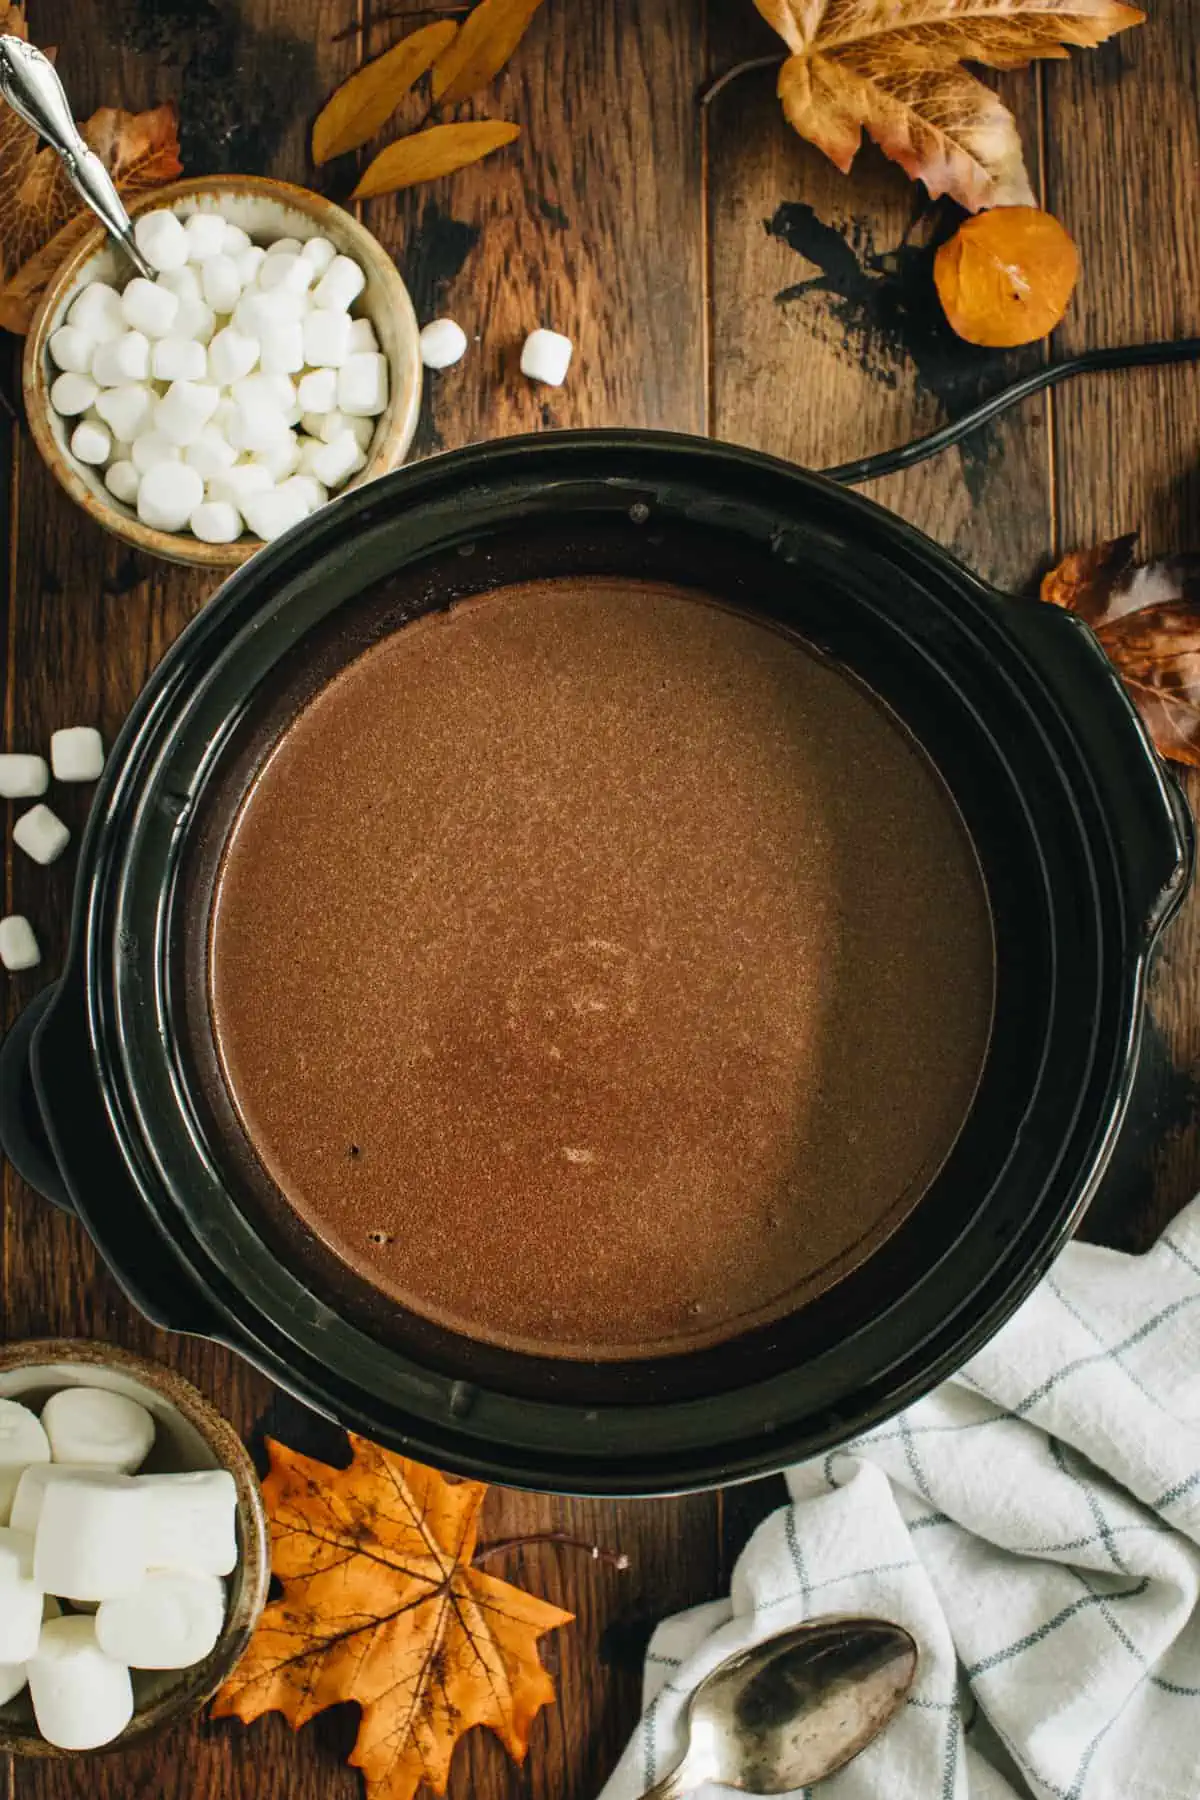 Pumpkin spice hot chocolate in a slow cooker ready to serve.